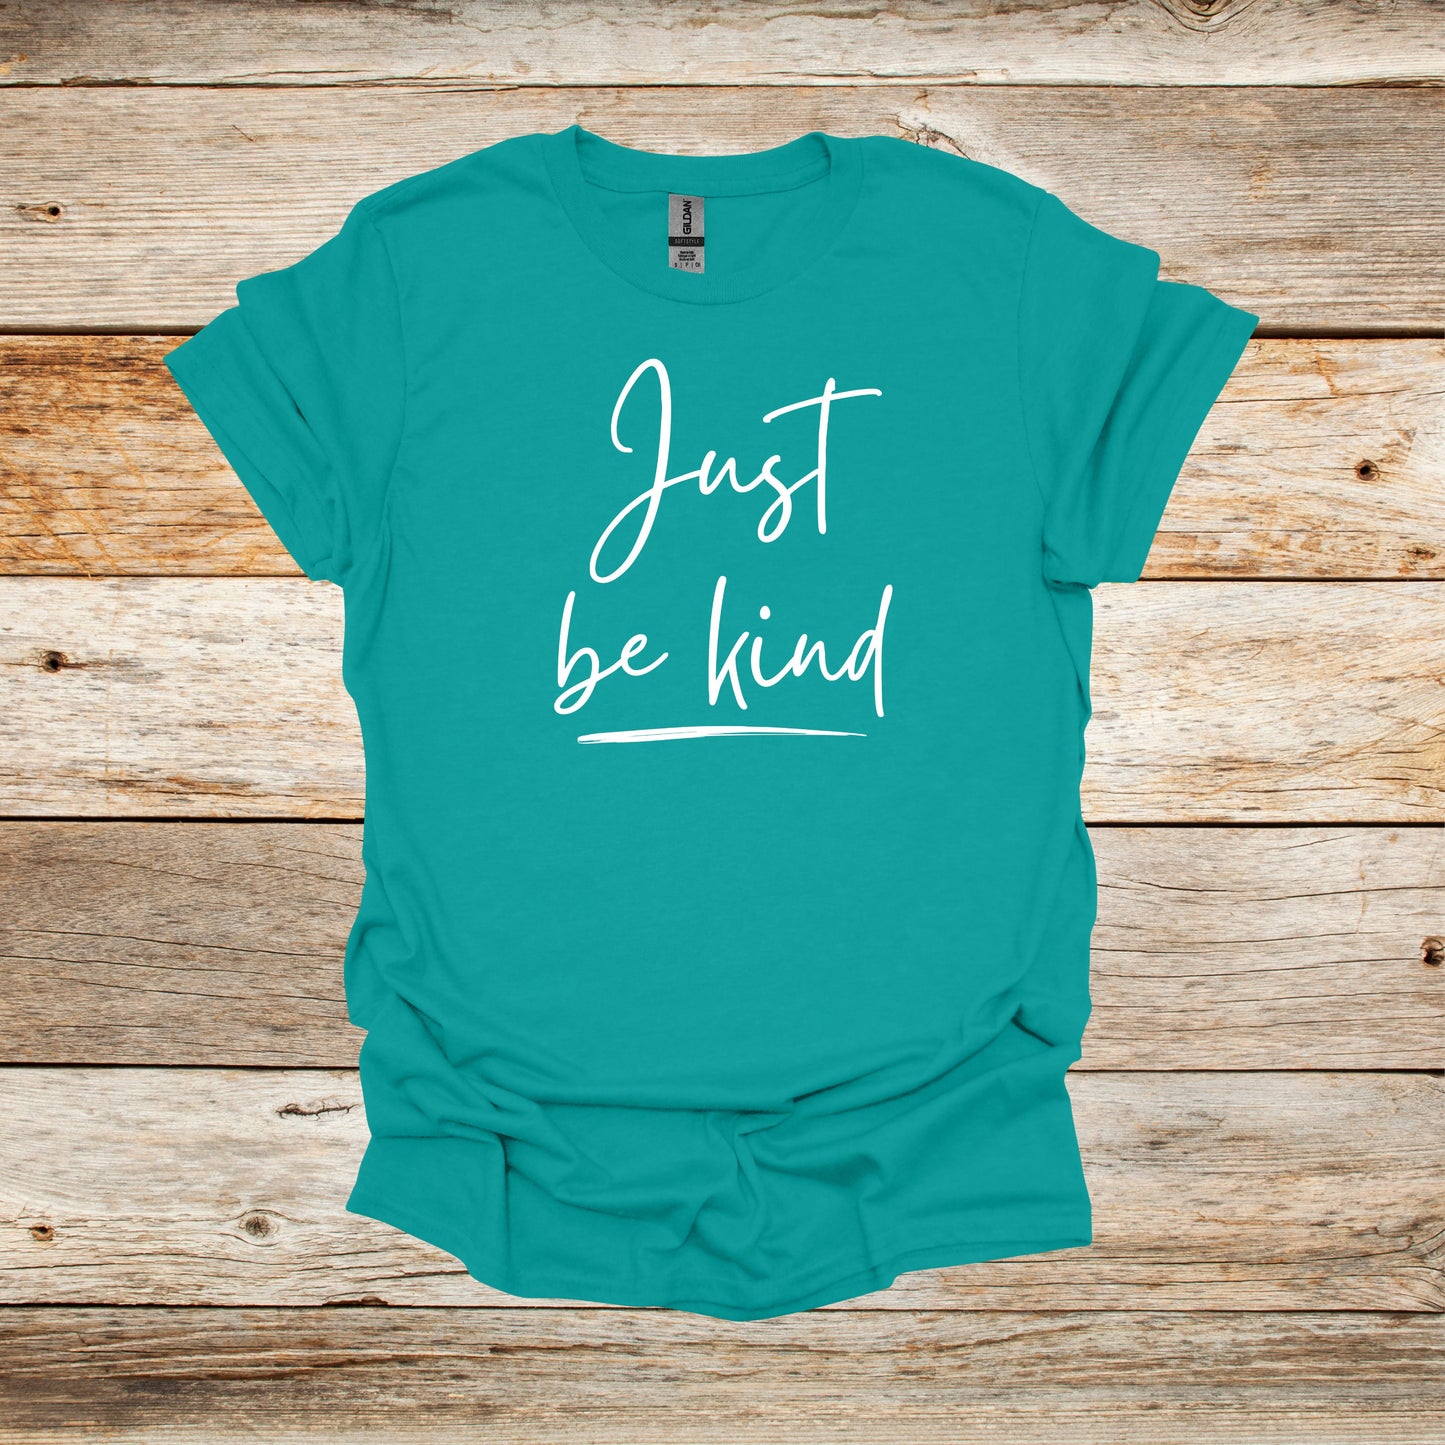 Sayings T-Shirt - Just Be Kind - Men's and Women's Tee Shirts - Sayings T-Shirts Graphic Avenue Jade Dome Adult Small 